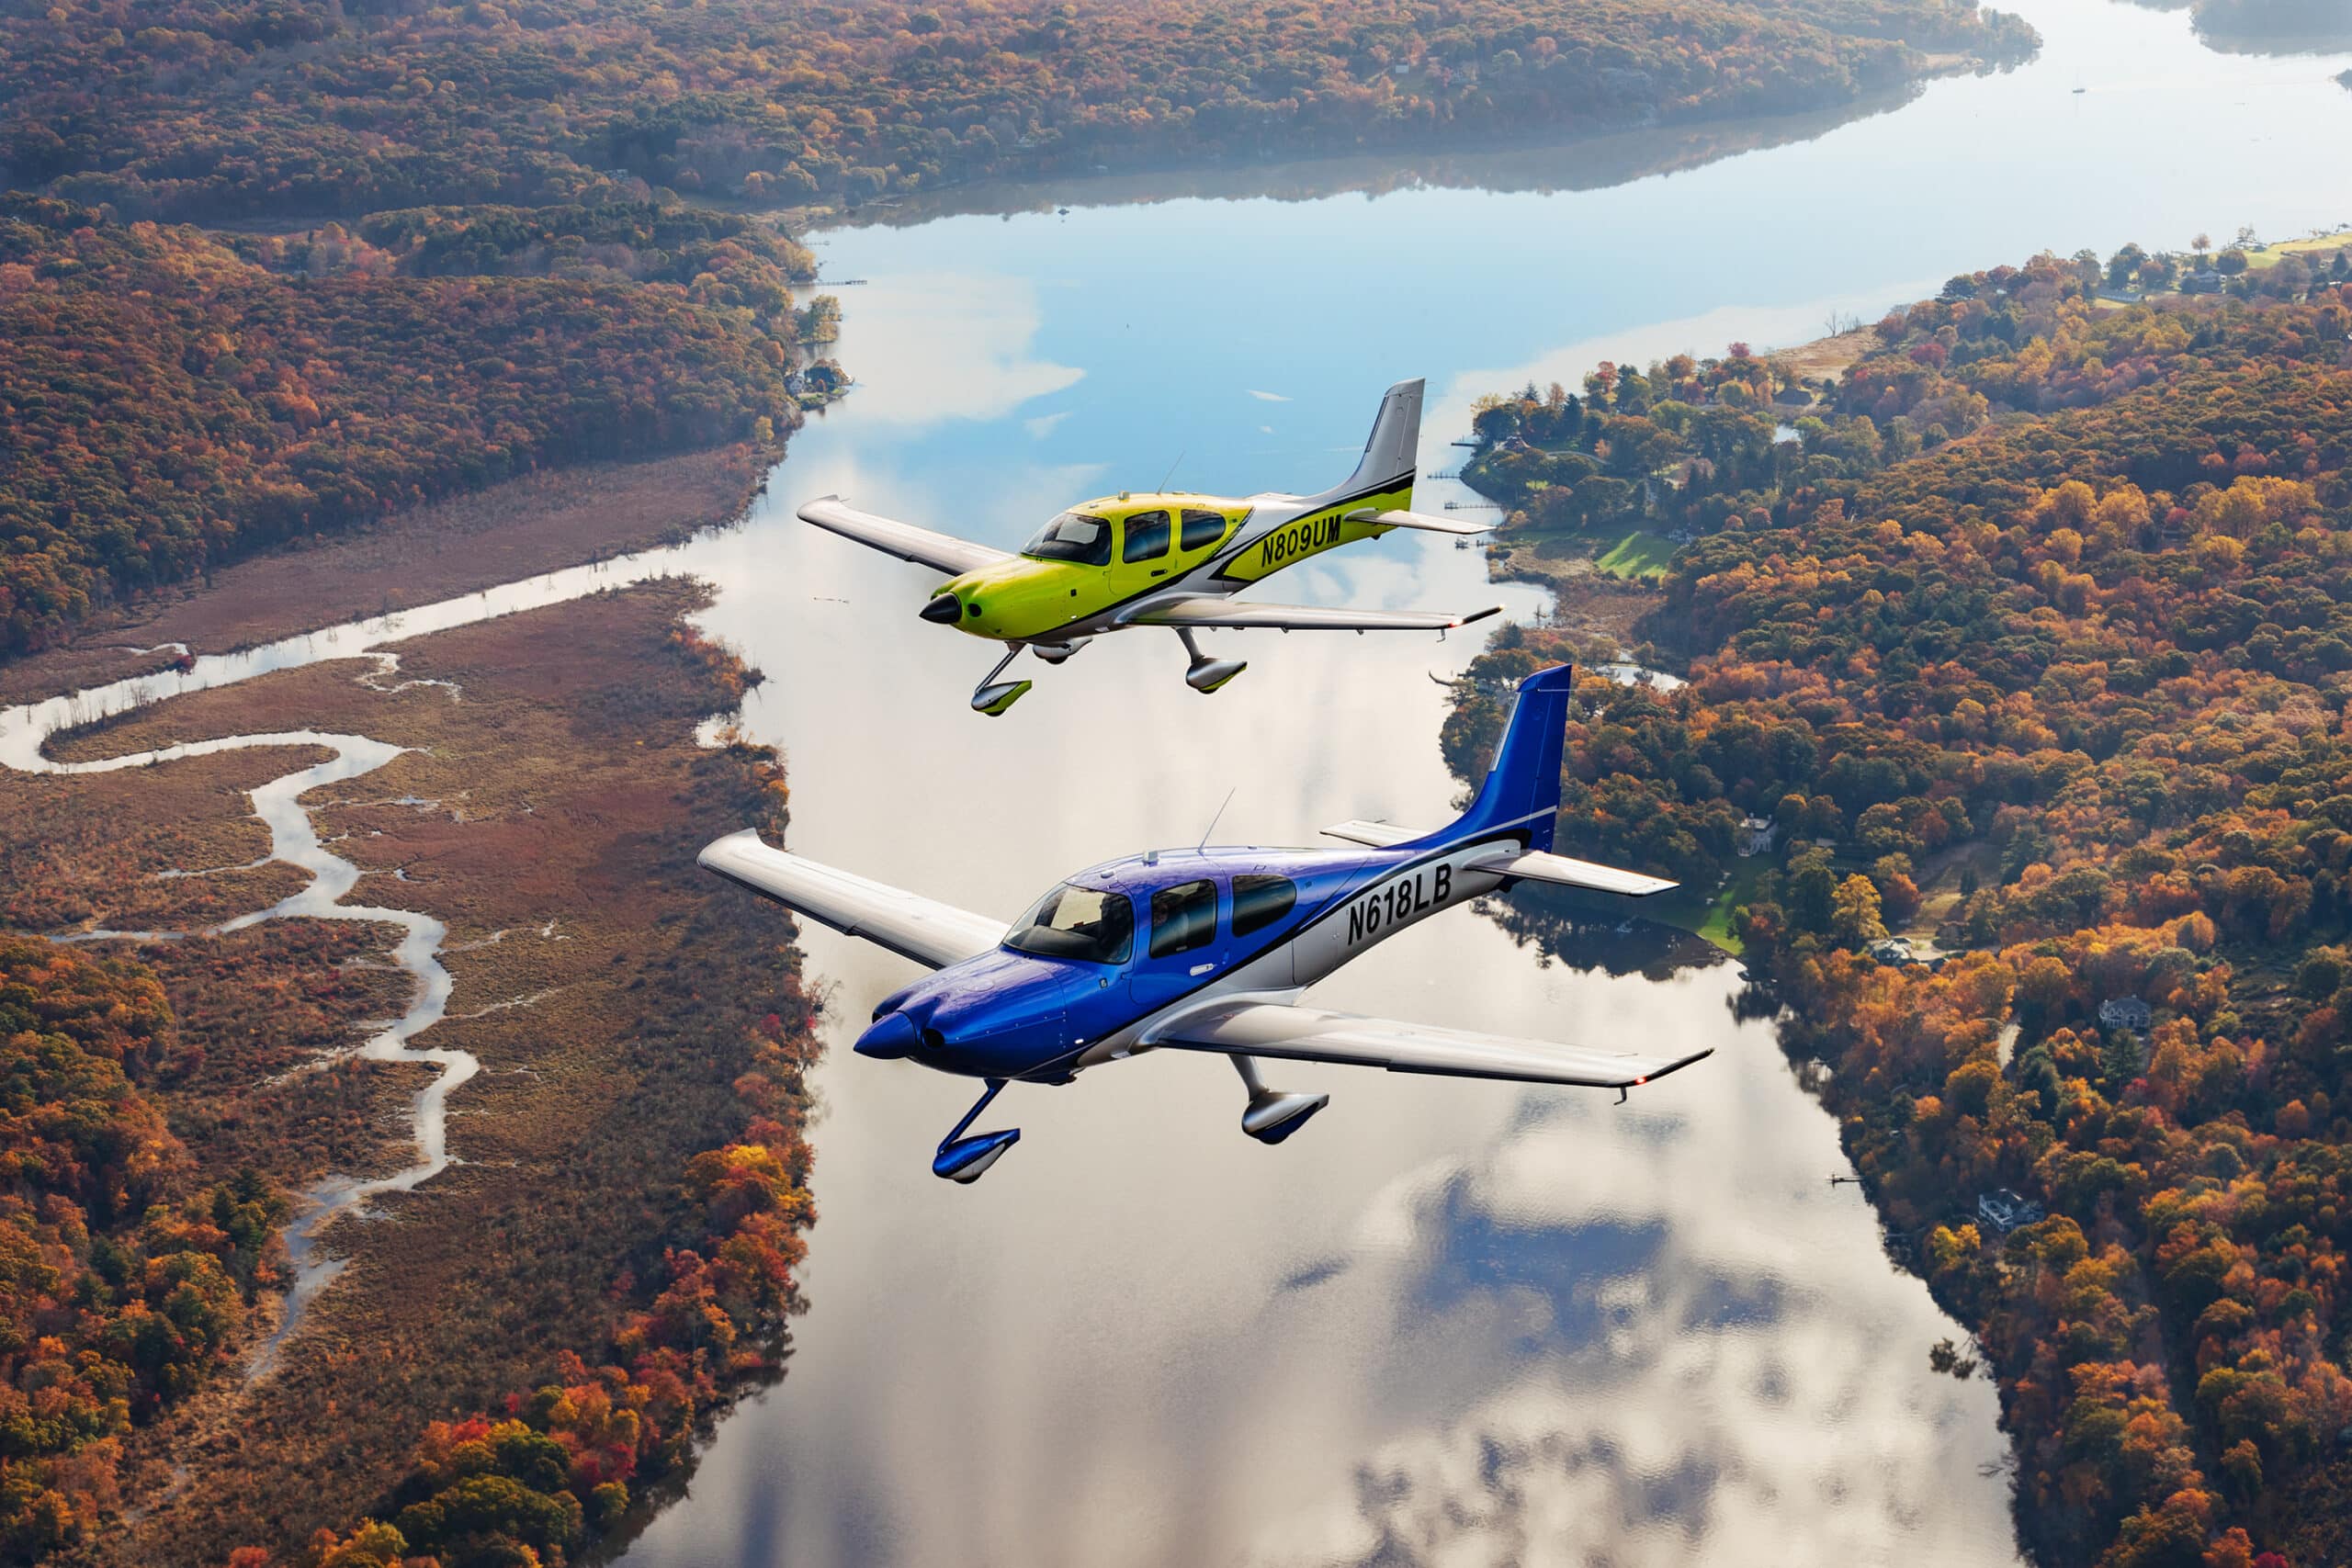 Cirrus Aircraft Redefines Personal Aviation with SR Series G7 Featuring Touchscreen Displays, New Safety Systems, Premium Travel Amenities and Connected Mobile App